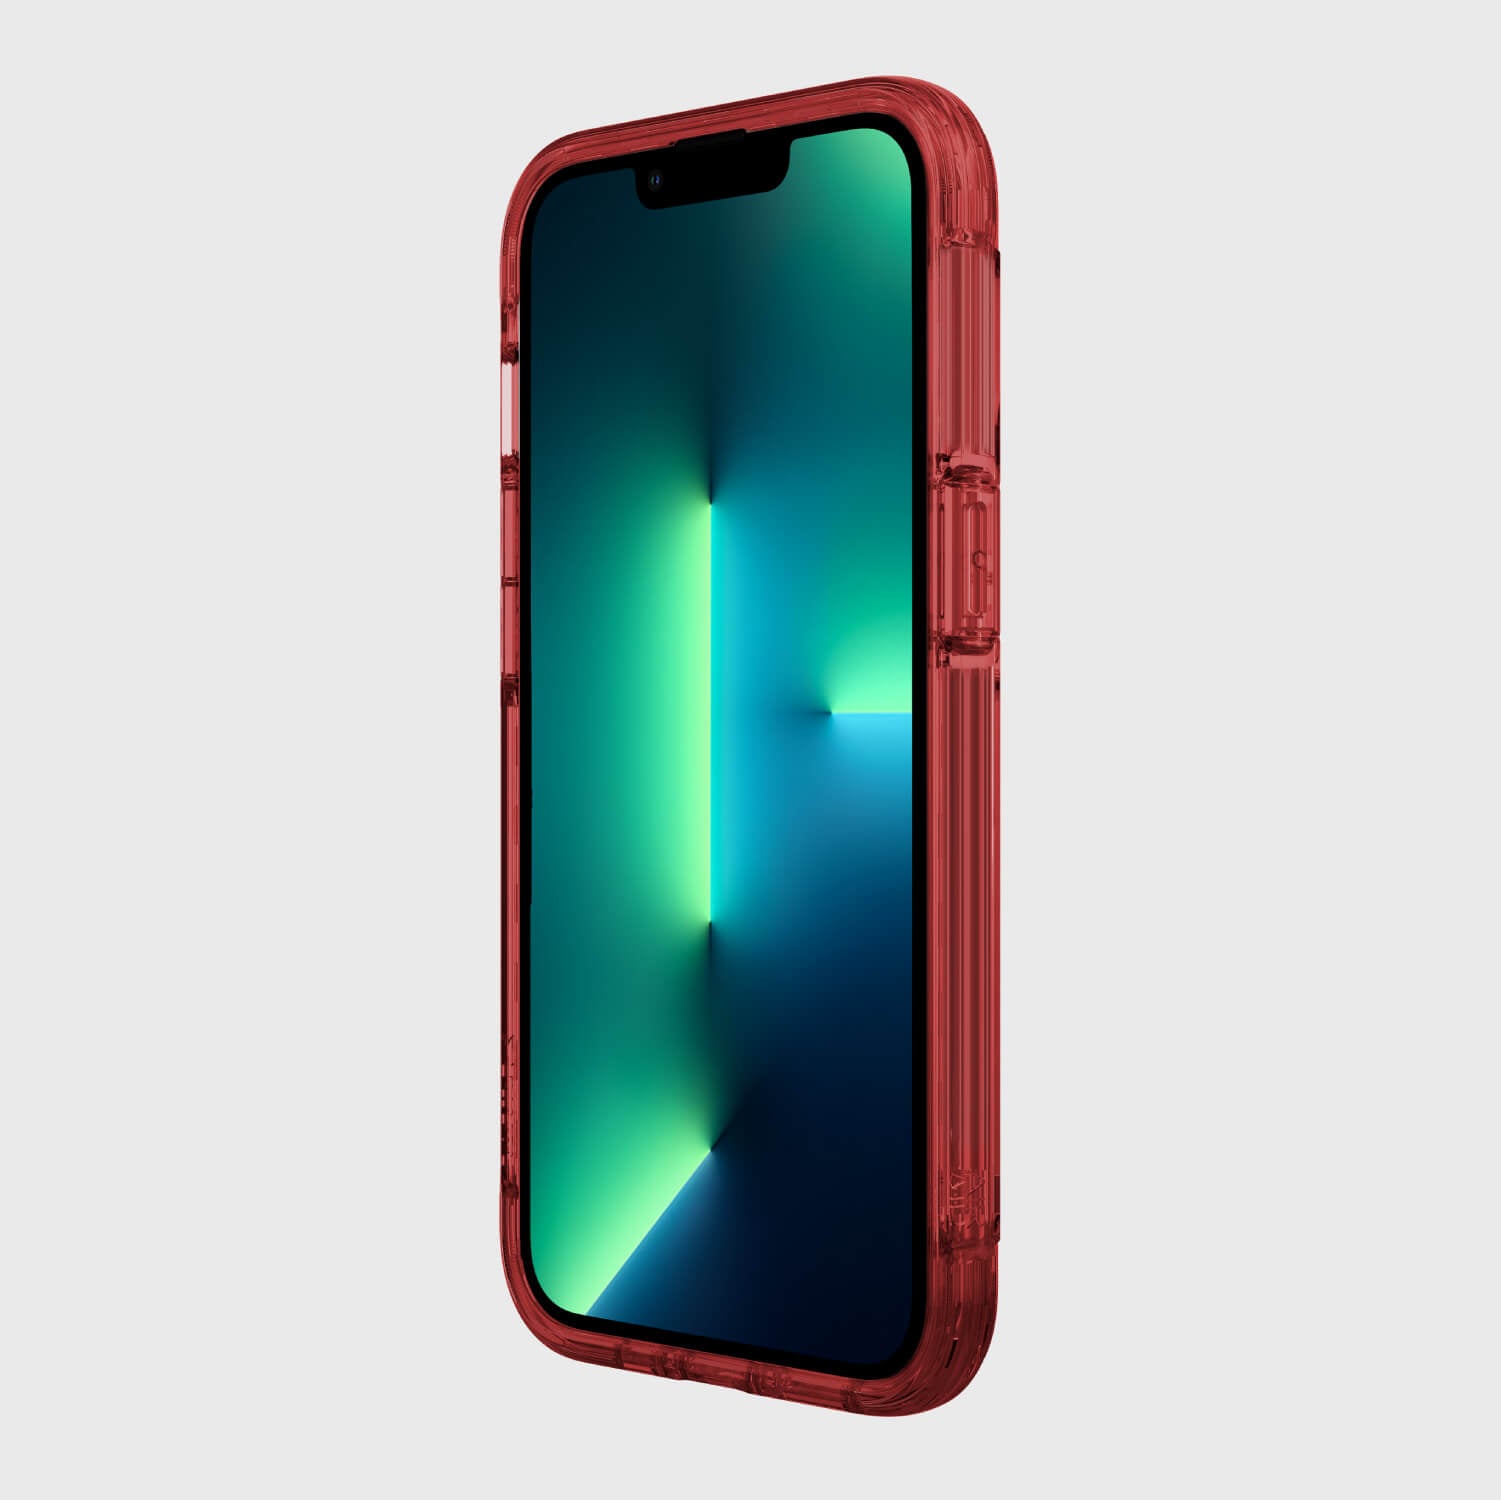 A red, drop-proof Raptic iPhone 13 Pro Max Case - AIR with a blue and green screen for the iPhone 13 Pro Max.